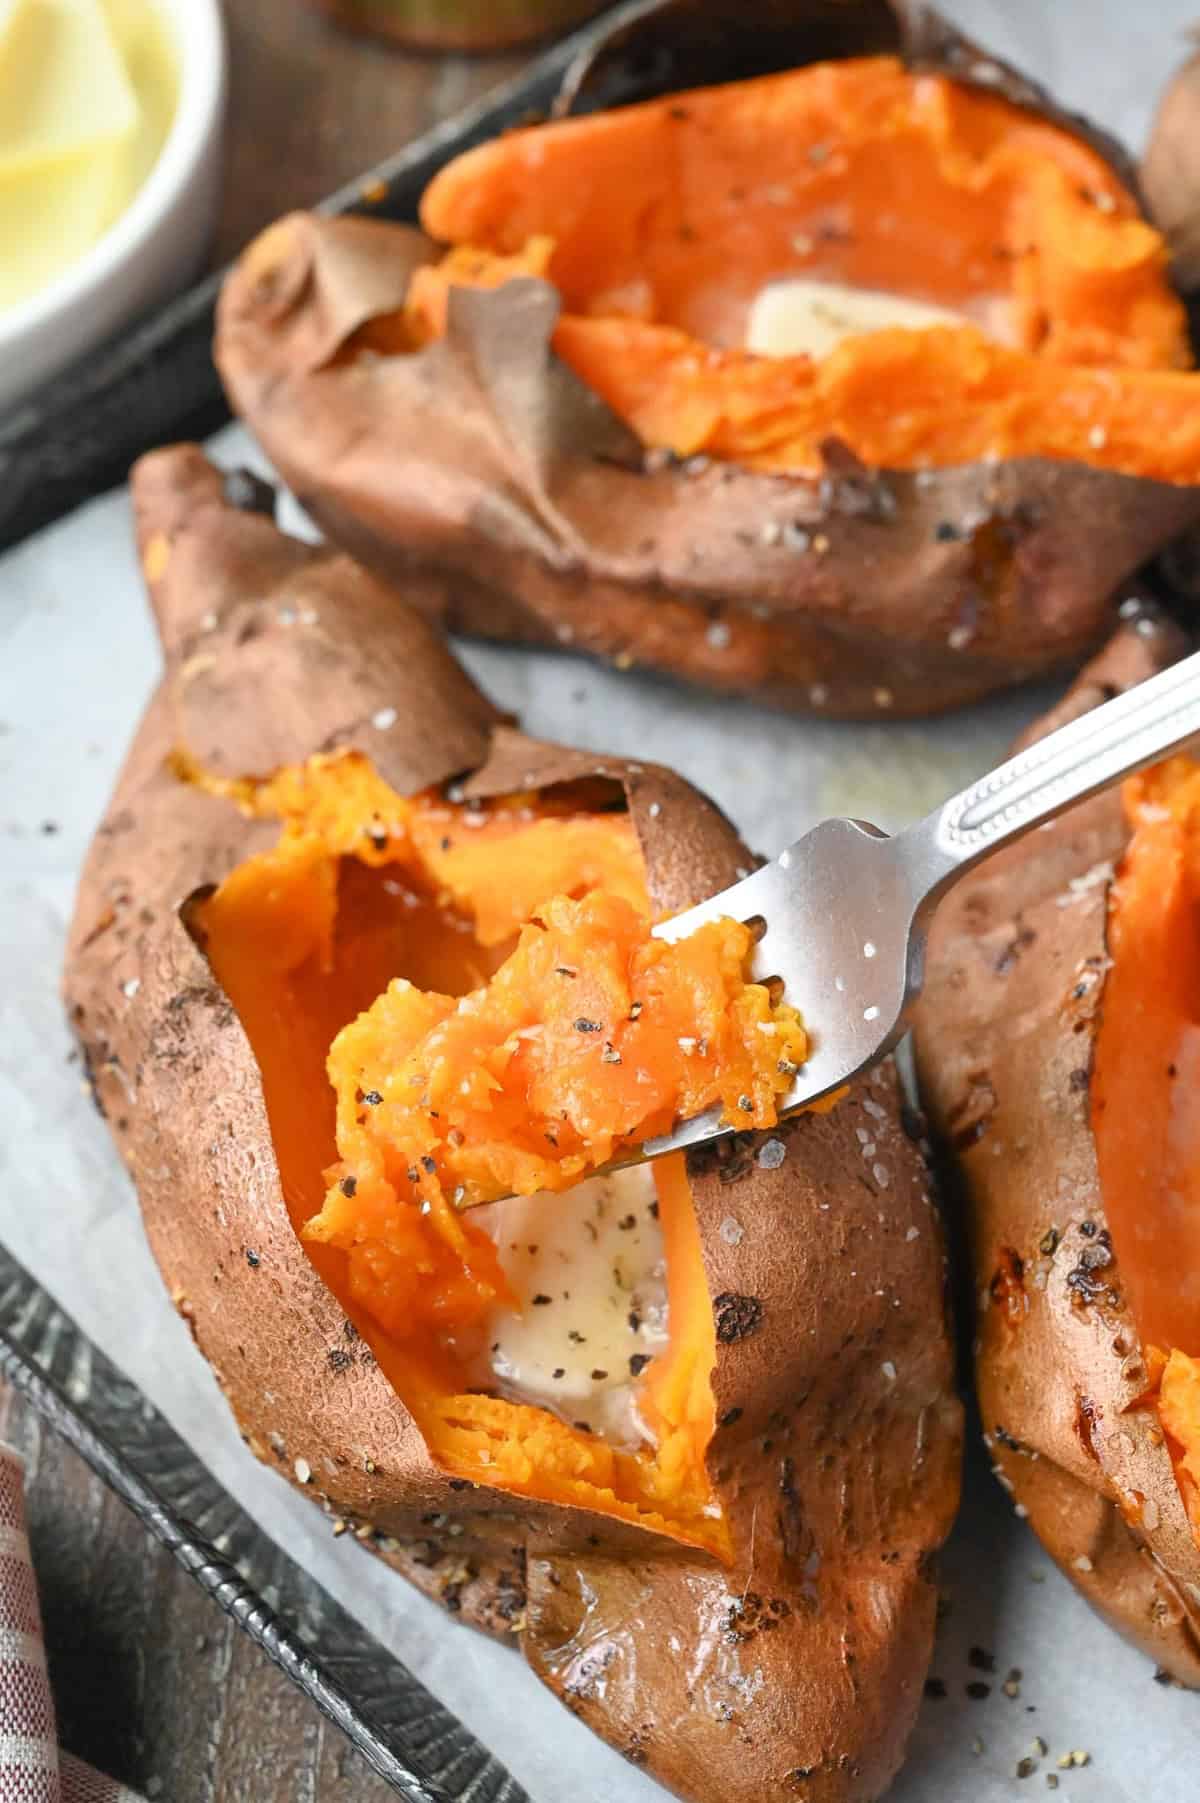 A fork taking a bite of air fryer baked sweet potato.